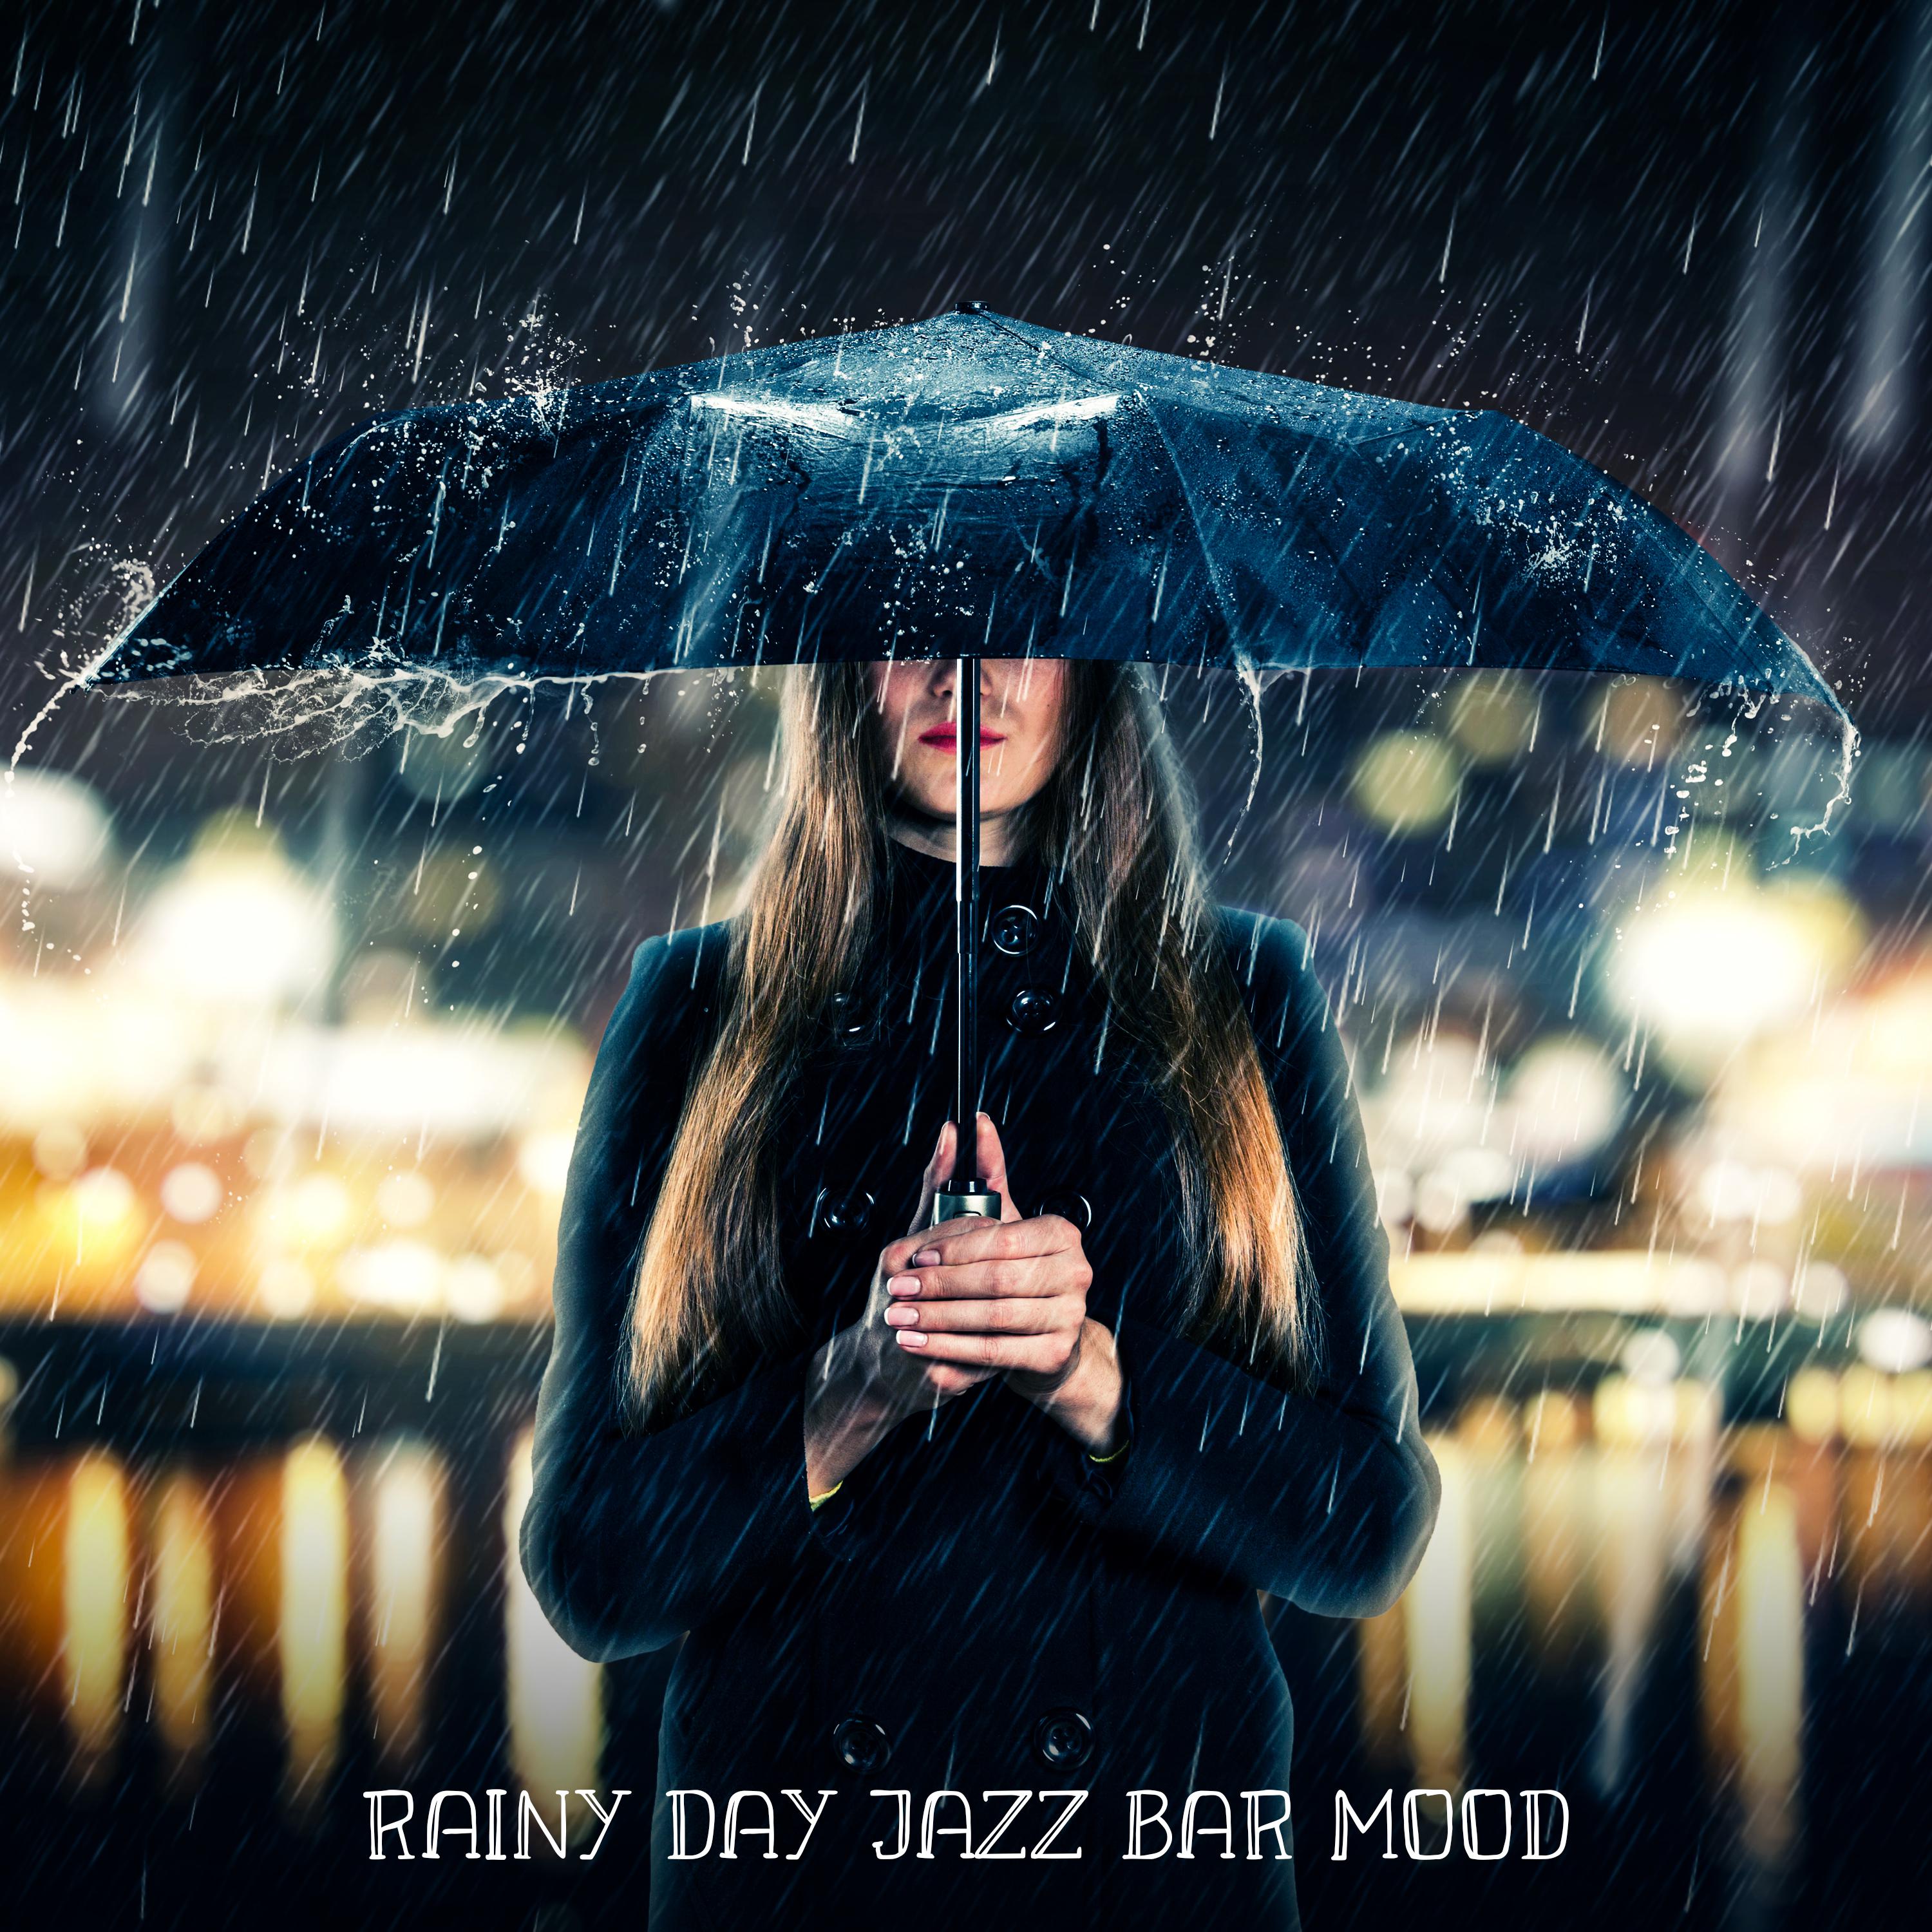 Rainy Day Jazz Bar Mood: 2019 Instrumental Smooth Jazz Music, Soft Melodies for Friends Meeting in the Club or in the Bar, Vintage Sounds of Piano, Sax & More